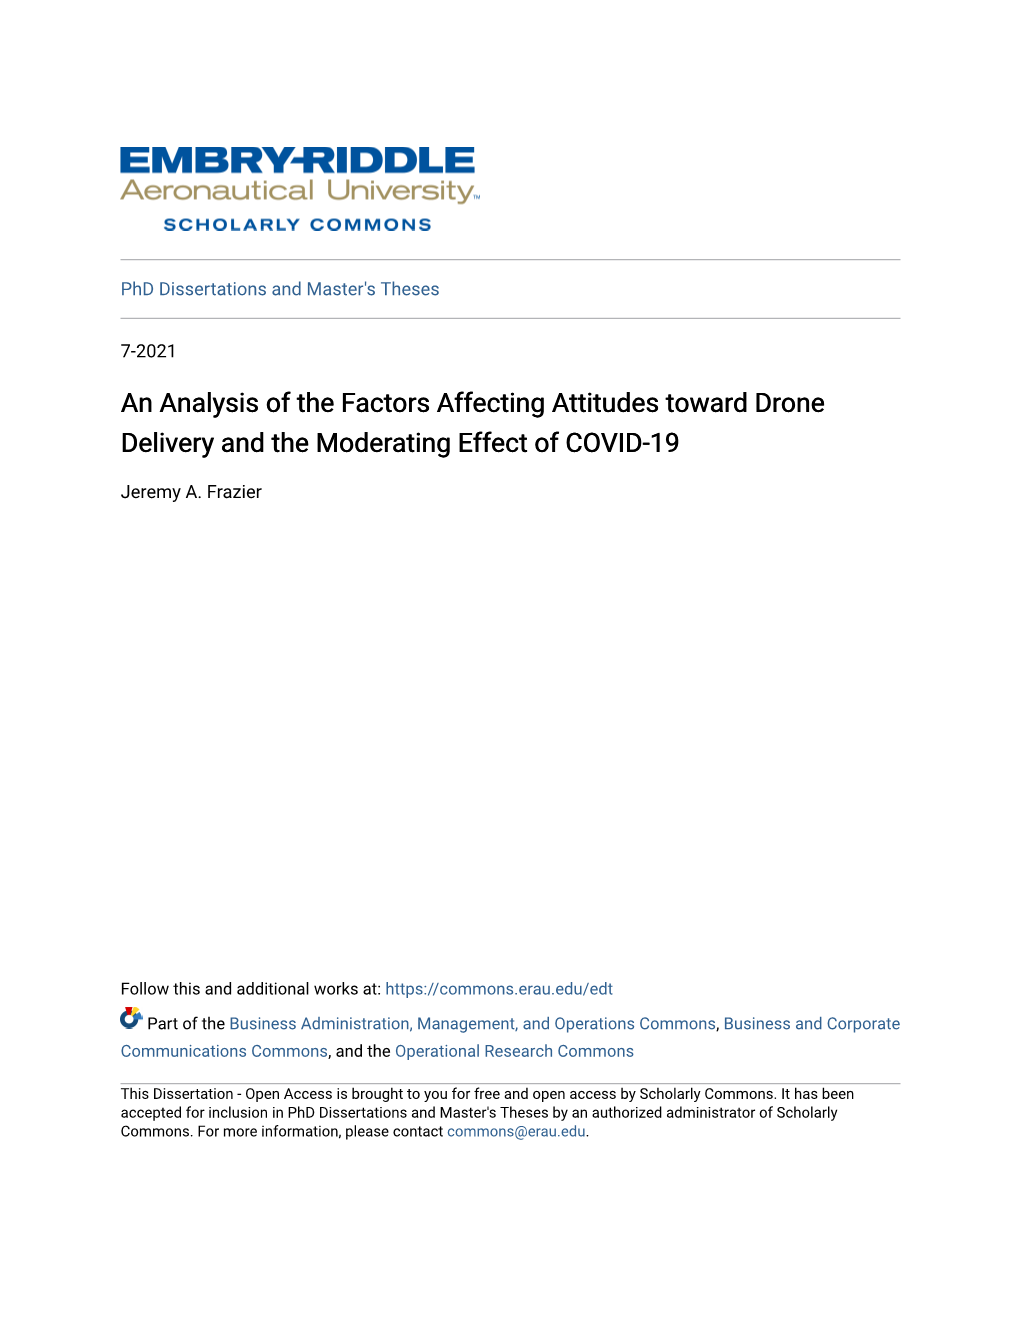 An Analysis of the Factors Affecting Attitudes Toward Drone Delivery and the Moderating Effect of COVID-19